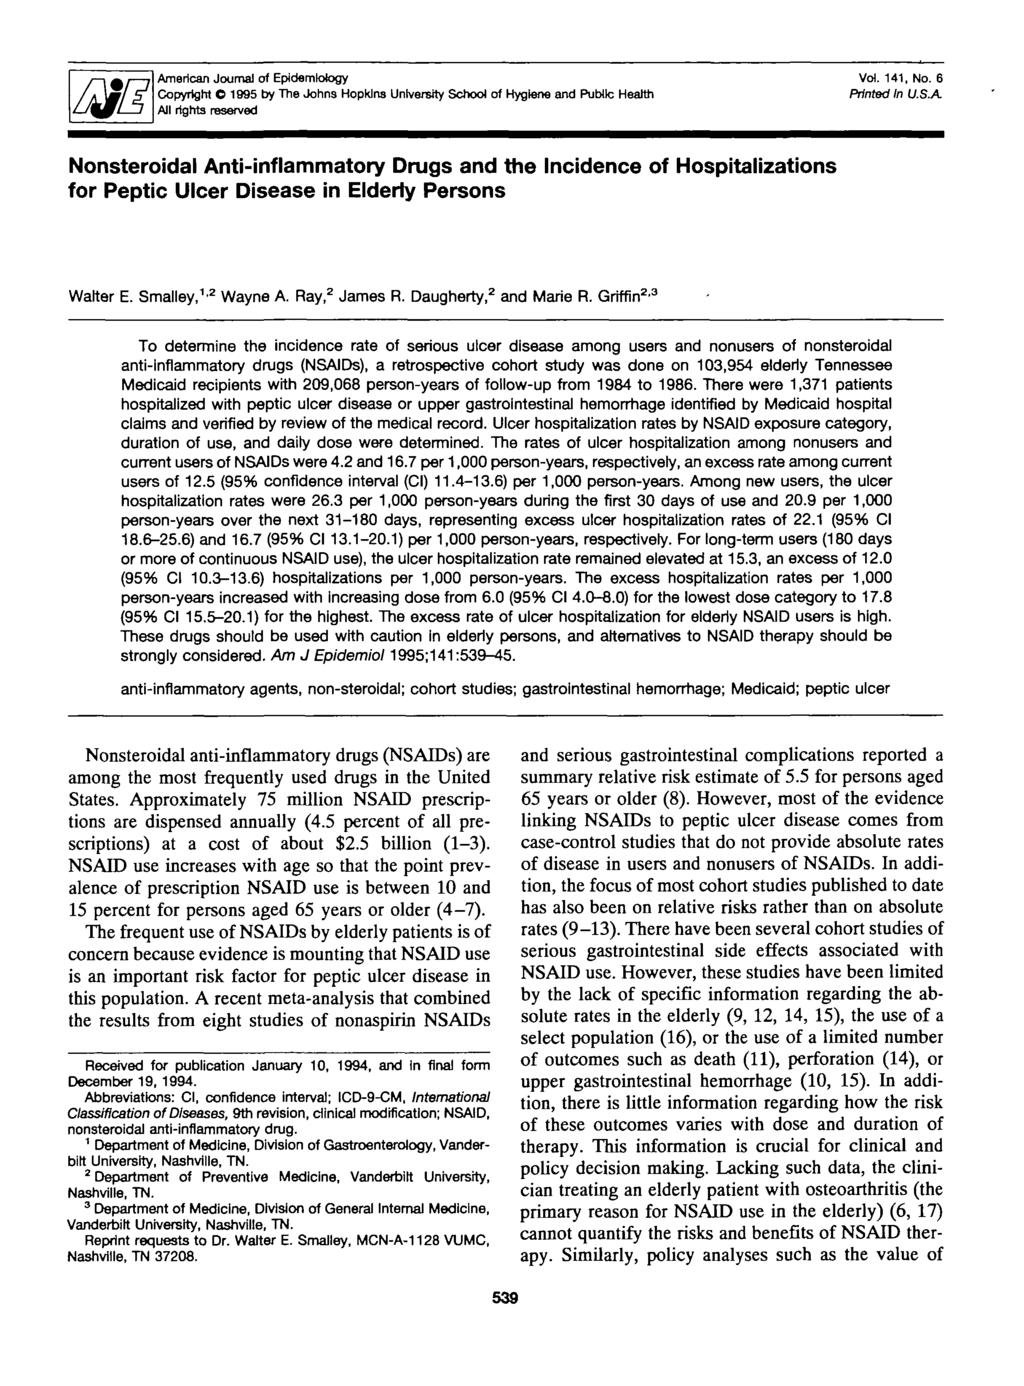 American Journal of Epidemiology Copyright C 1995 by The Johns Hopkins University School of Hygiene and Public Health All rights reserved Vol. 141, No. 6 Printed In USA.